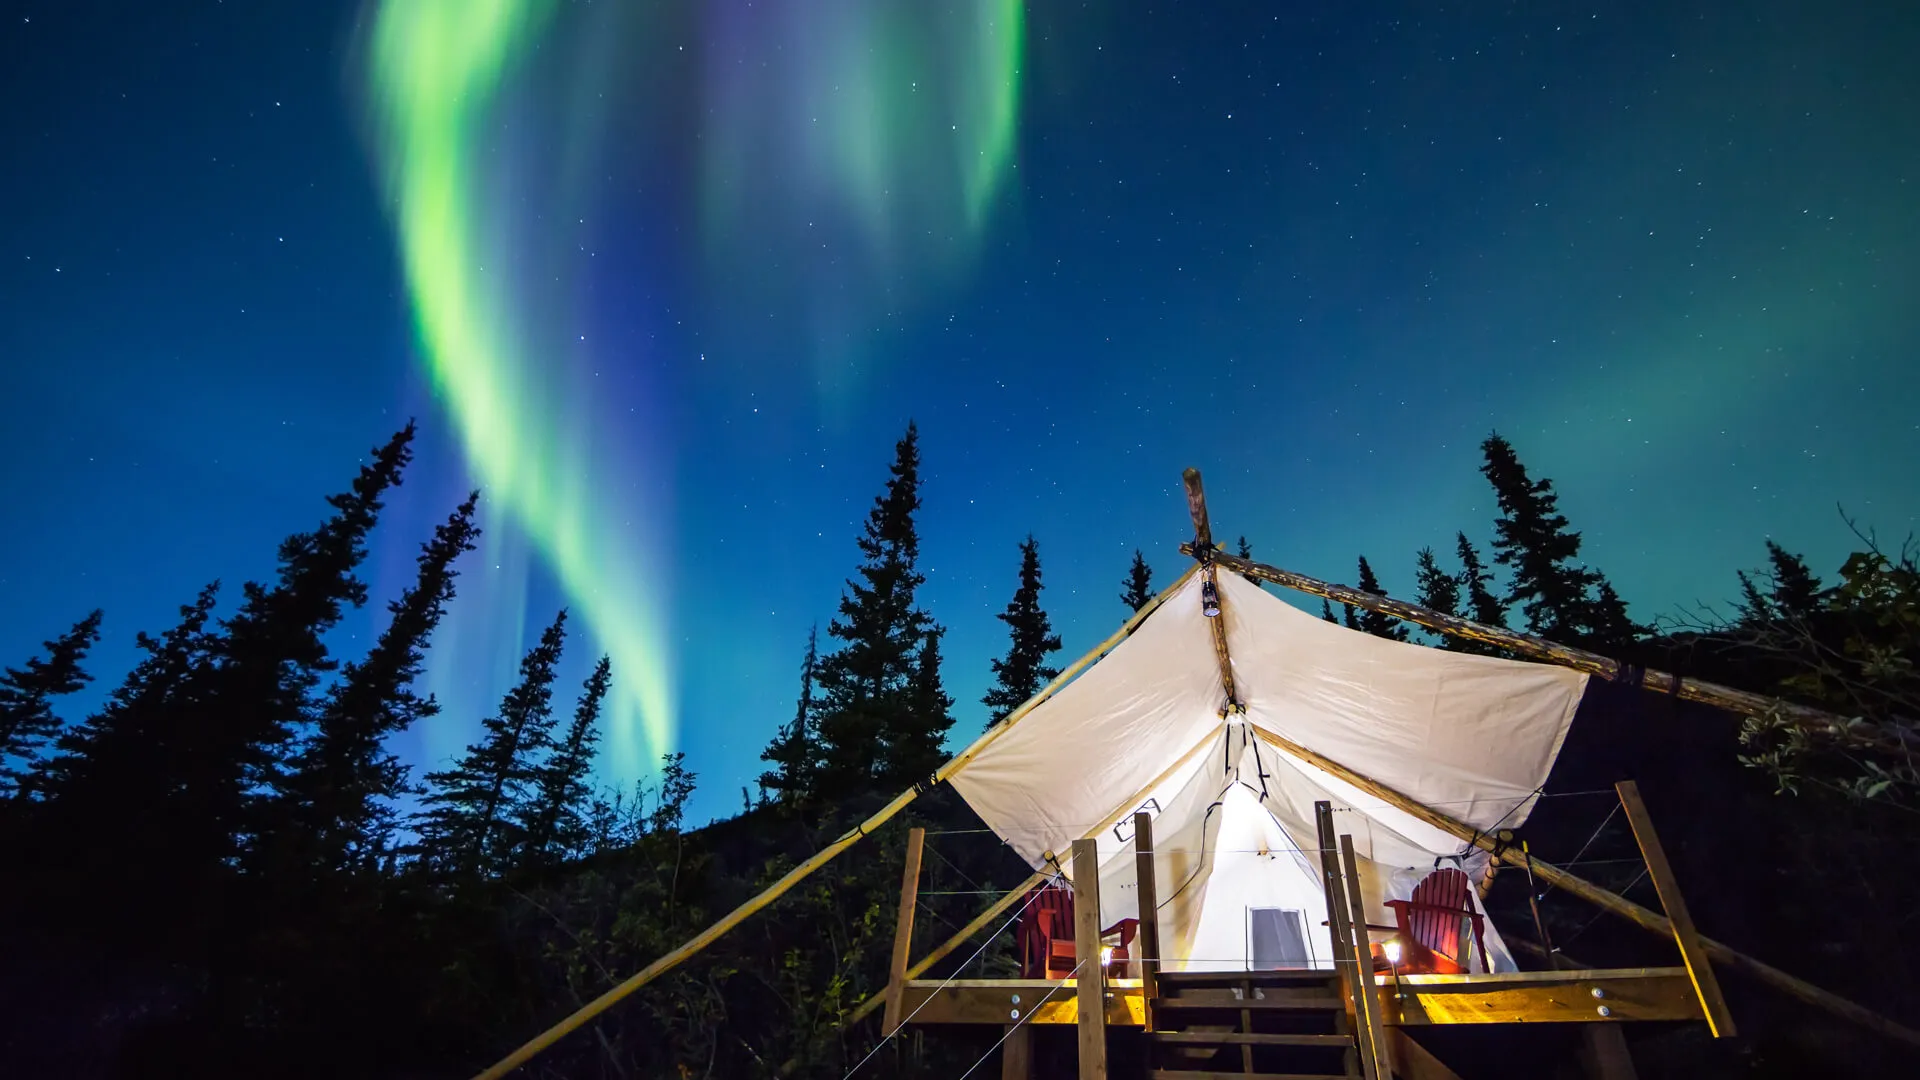 Aurora Borealis glowing green and pink over large canvas luxury camping tent in Alaska.